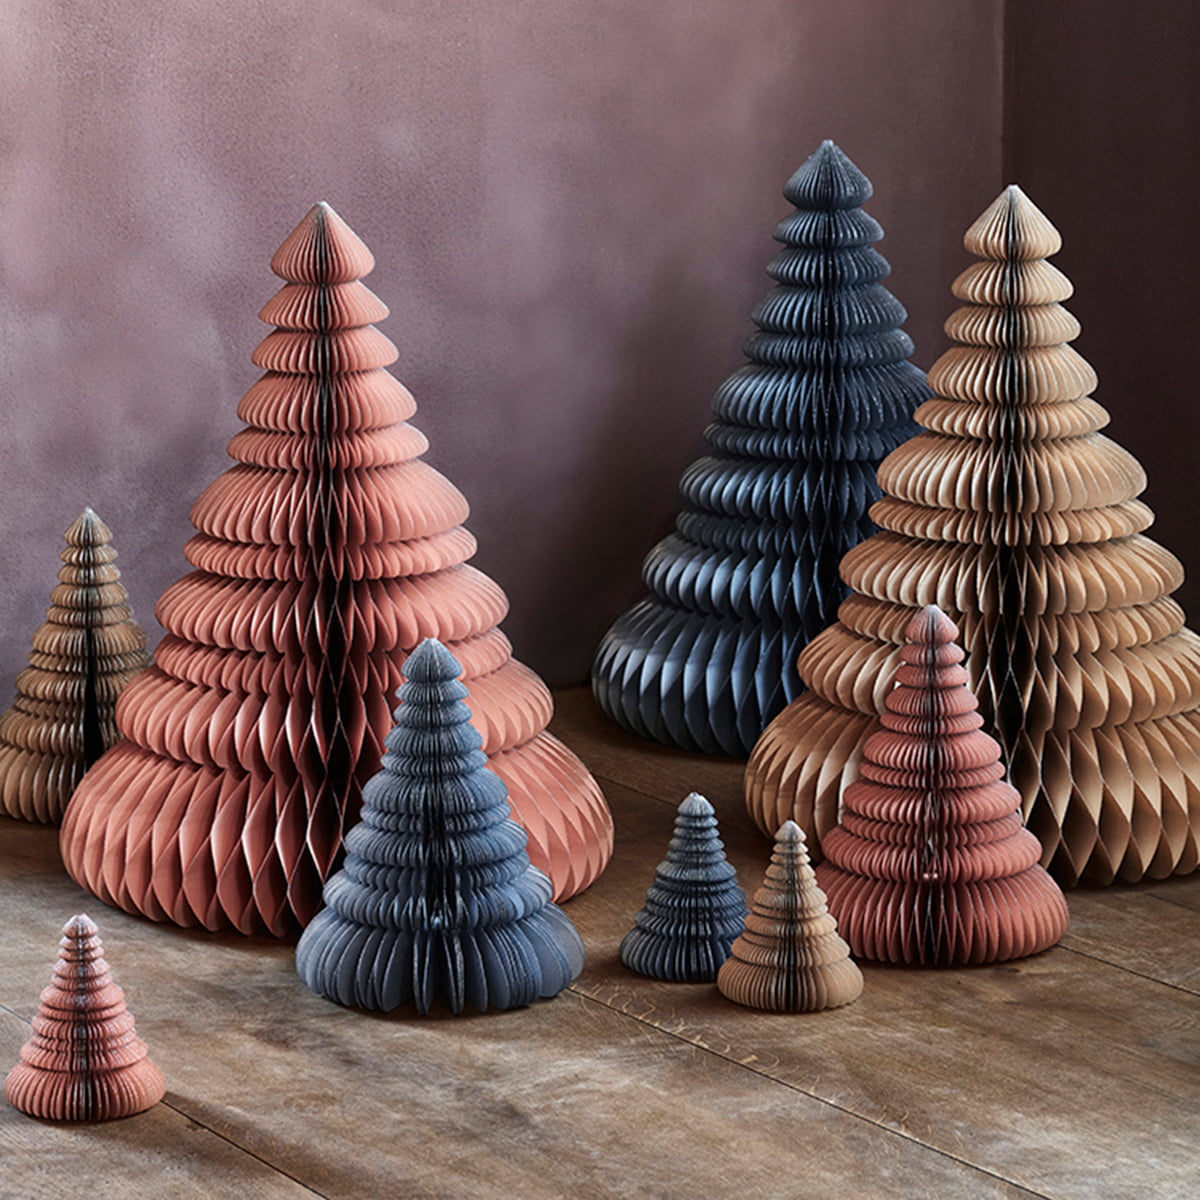 2 Germany Metallic Paper Cones for You to Decorate Pink Bronze